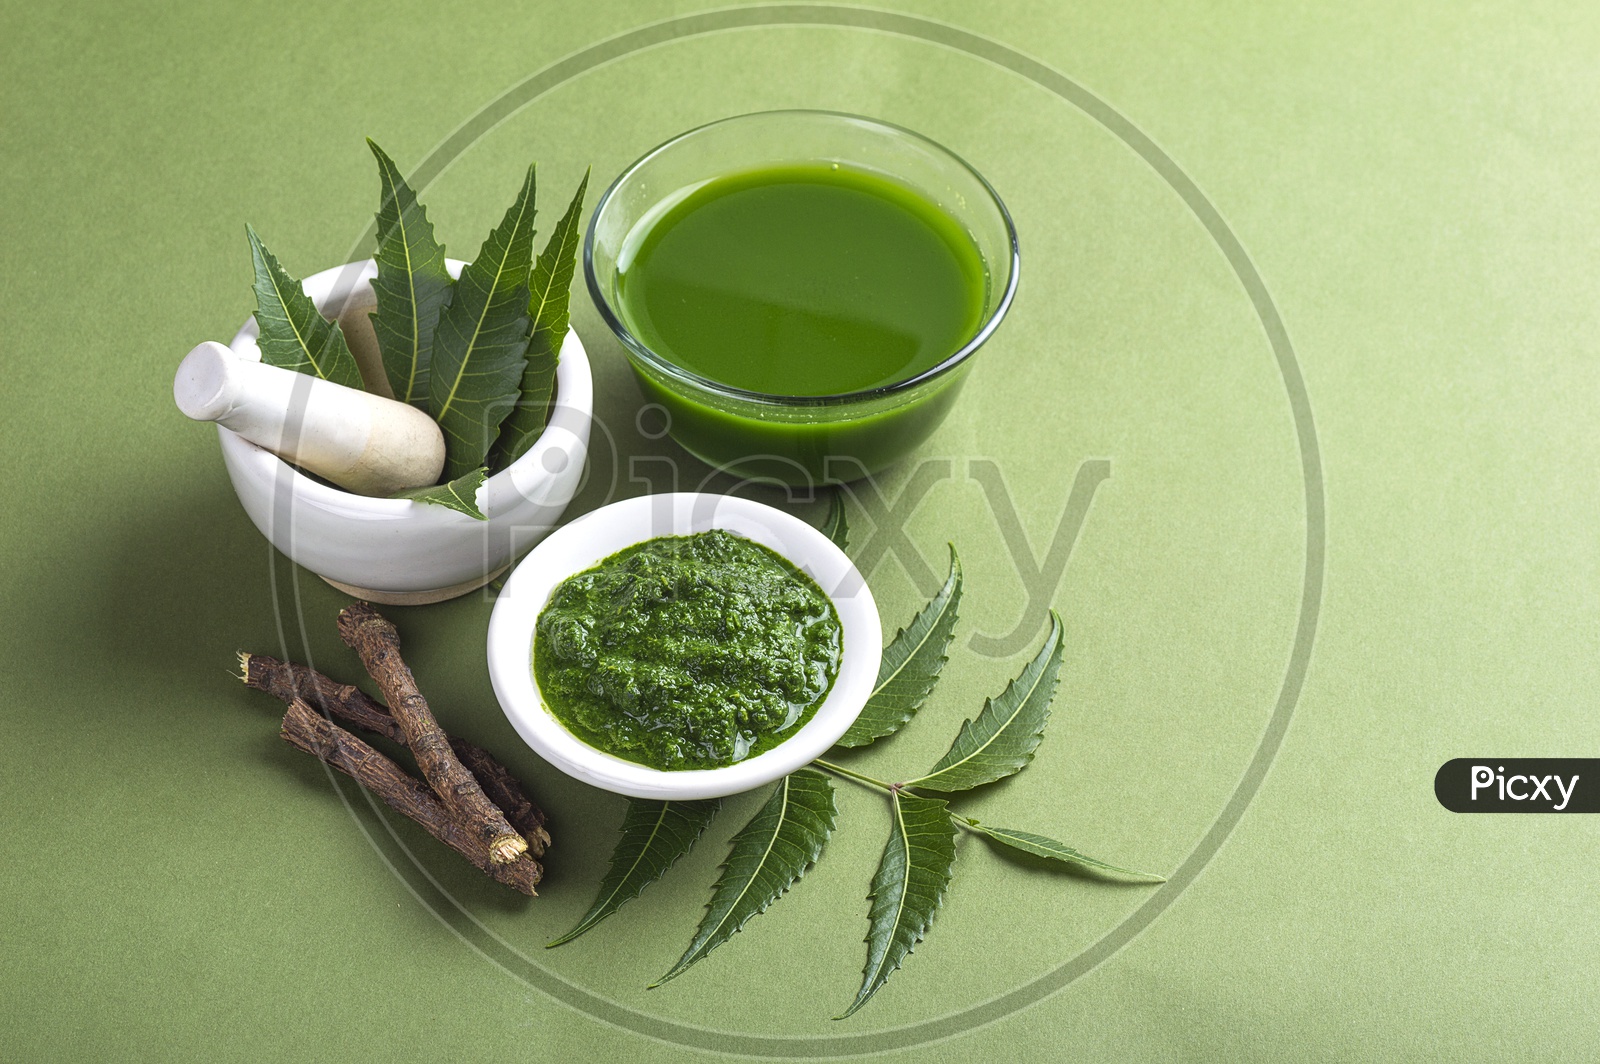 Medicinal Neem leaves in mortar and pestle with neem paste, juice and twigs on green background